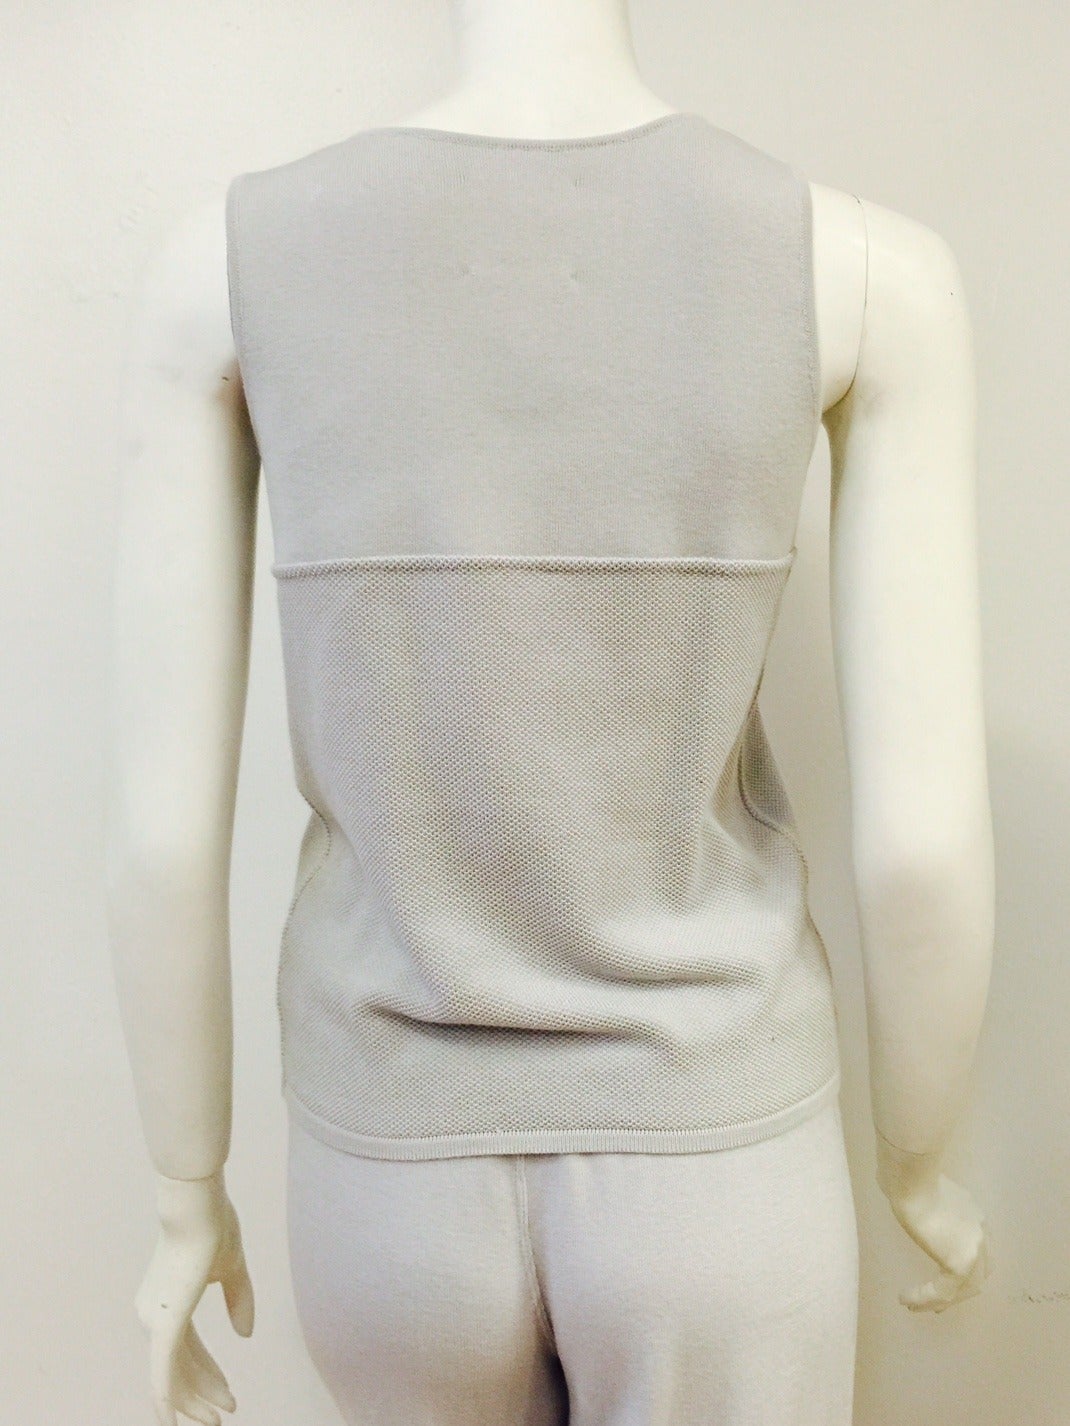 Chanel Identification Spring 2004 3-Piece Sporting Suit For Sale 2